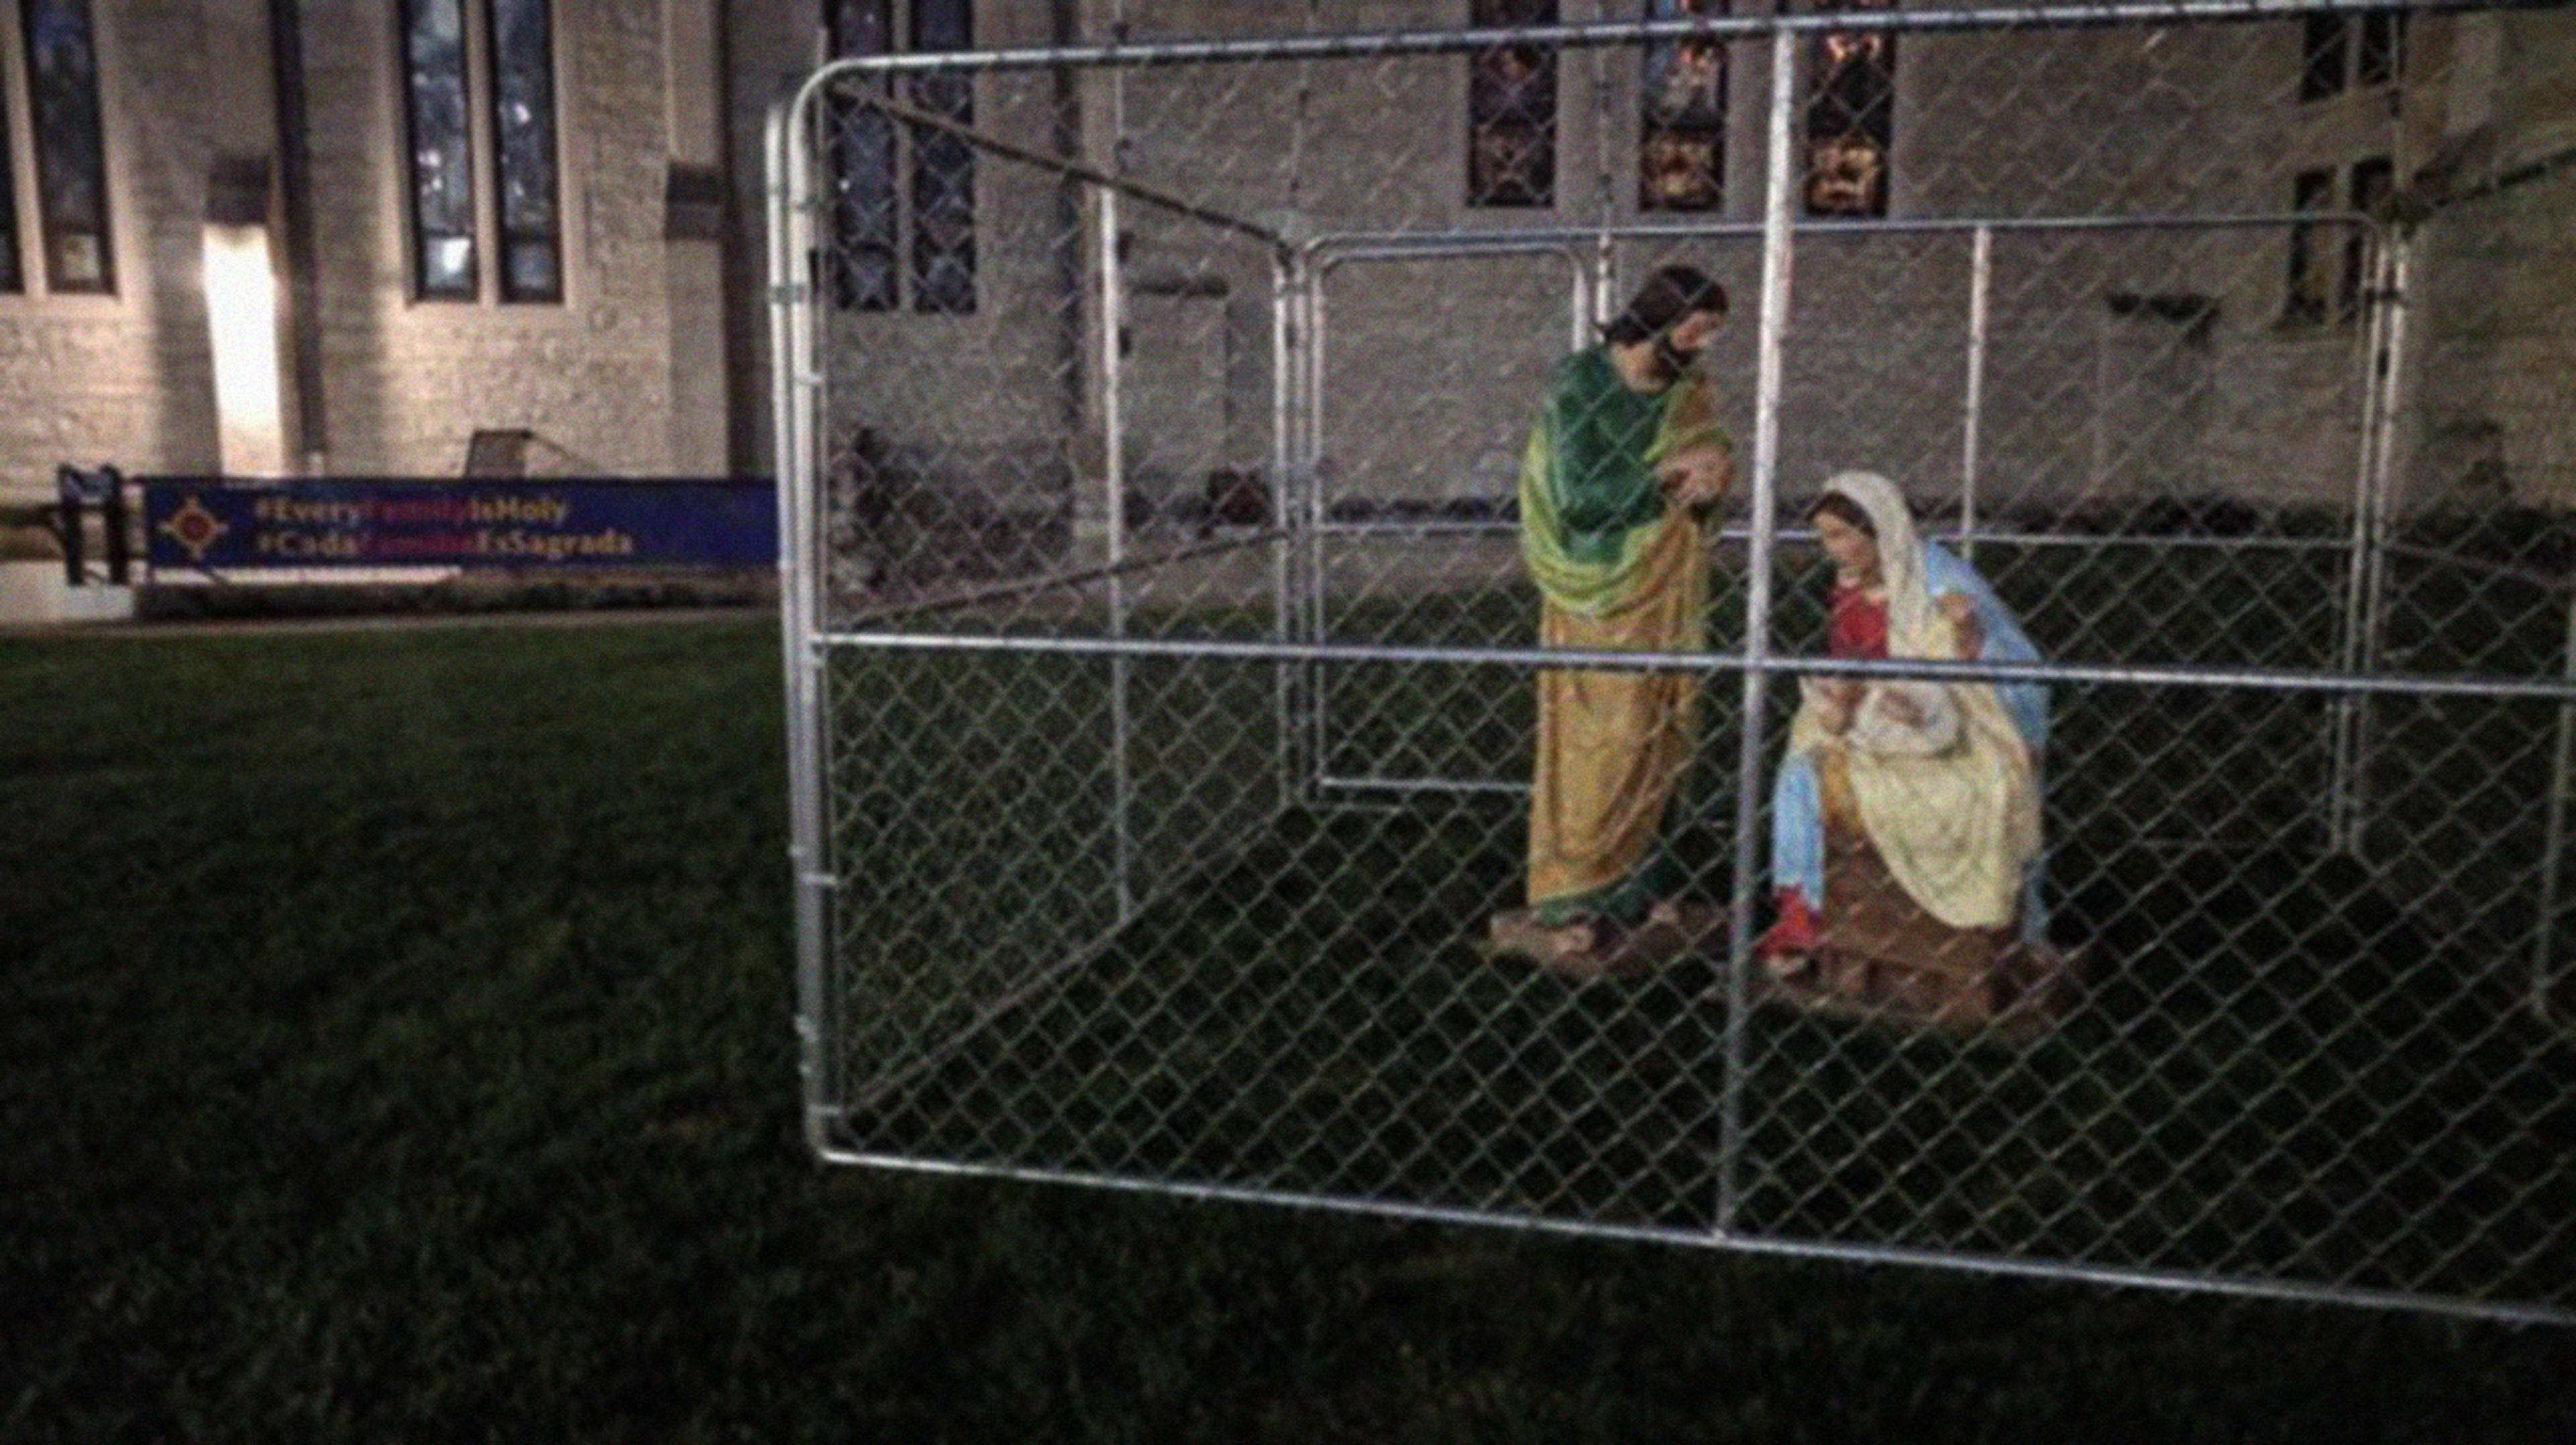 Creativity in protest: This church set a nativity scene in a cage